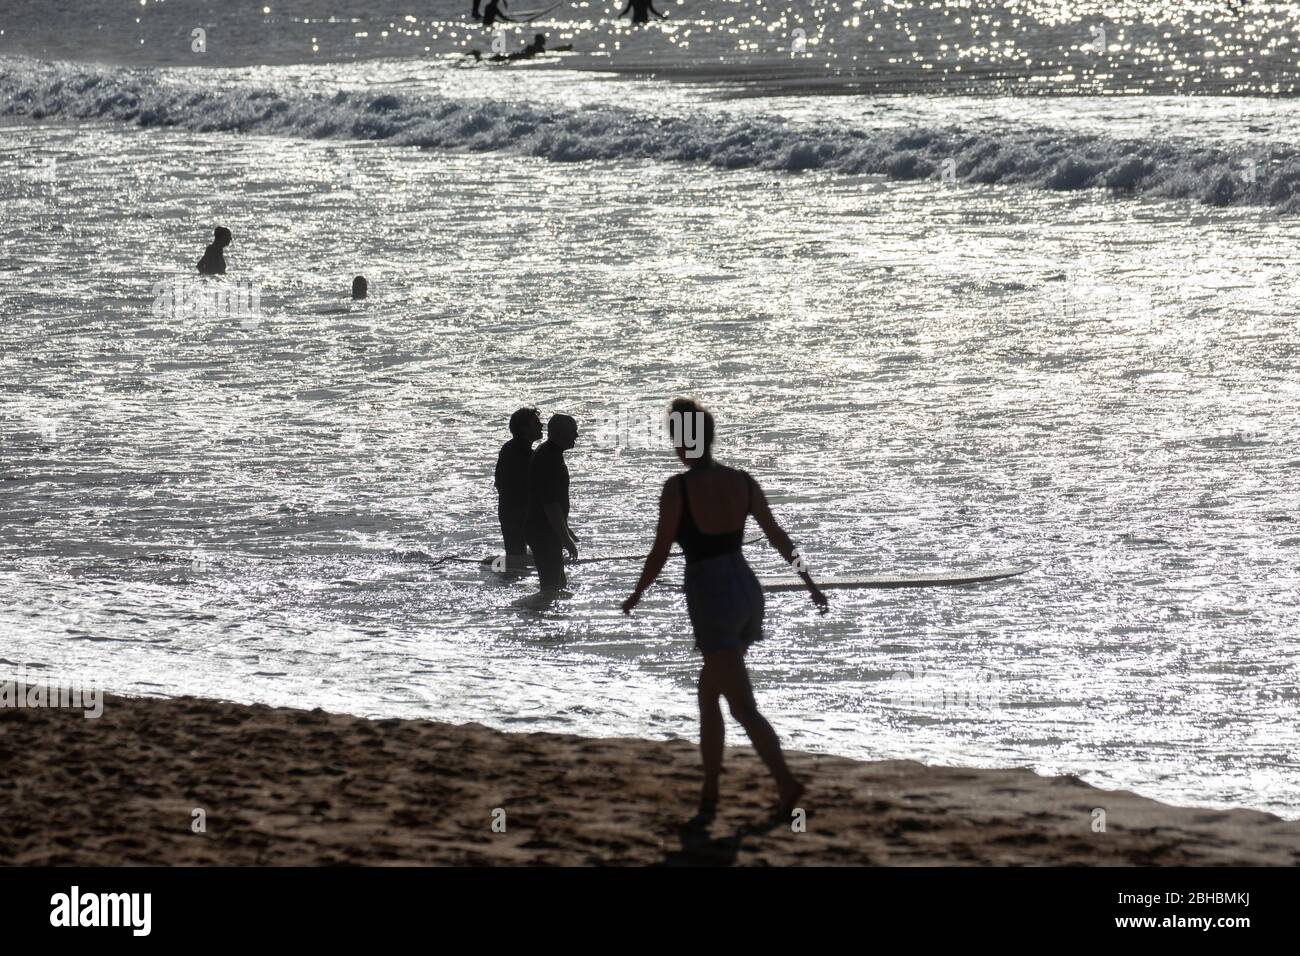 Early morning Sydney beach people exercise and surf on the beach early in the day,Australia Stock Photo